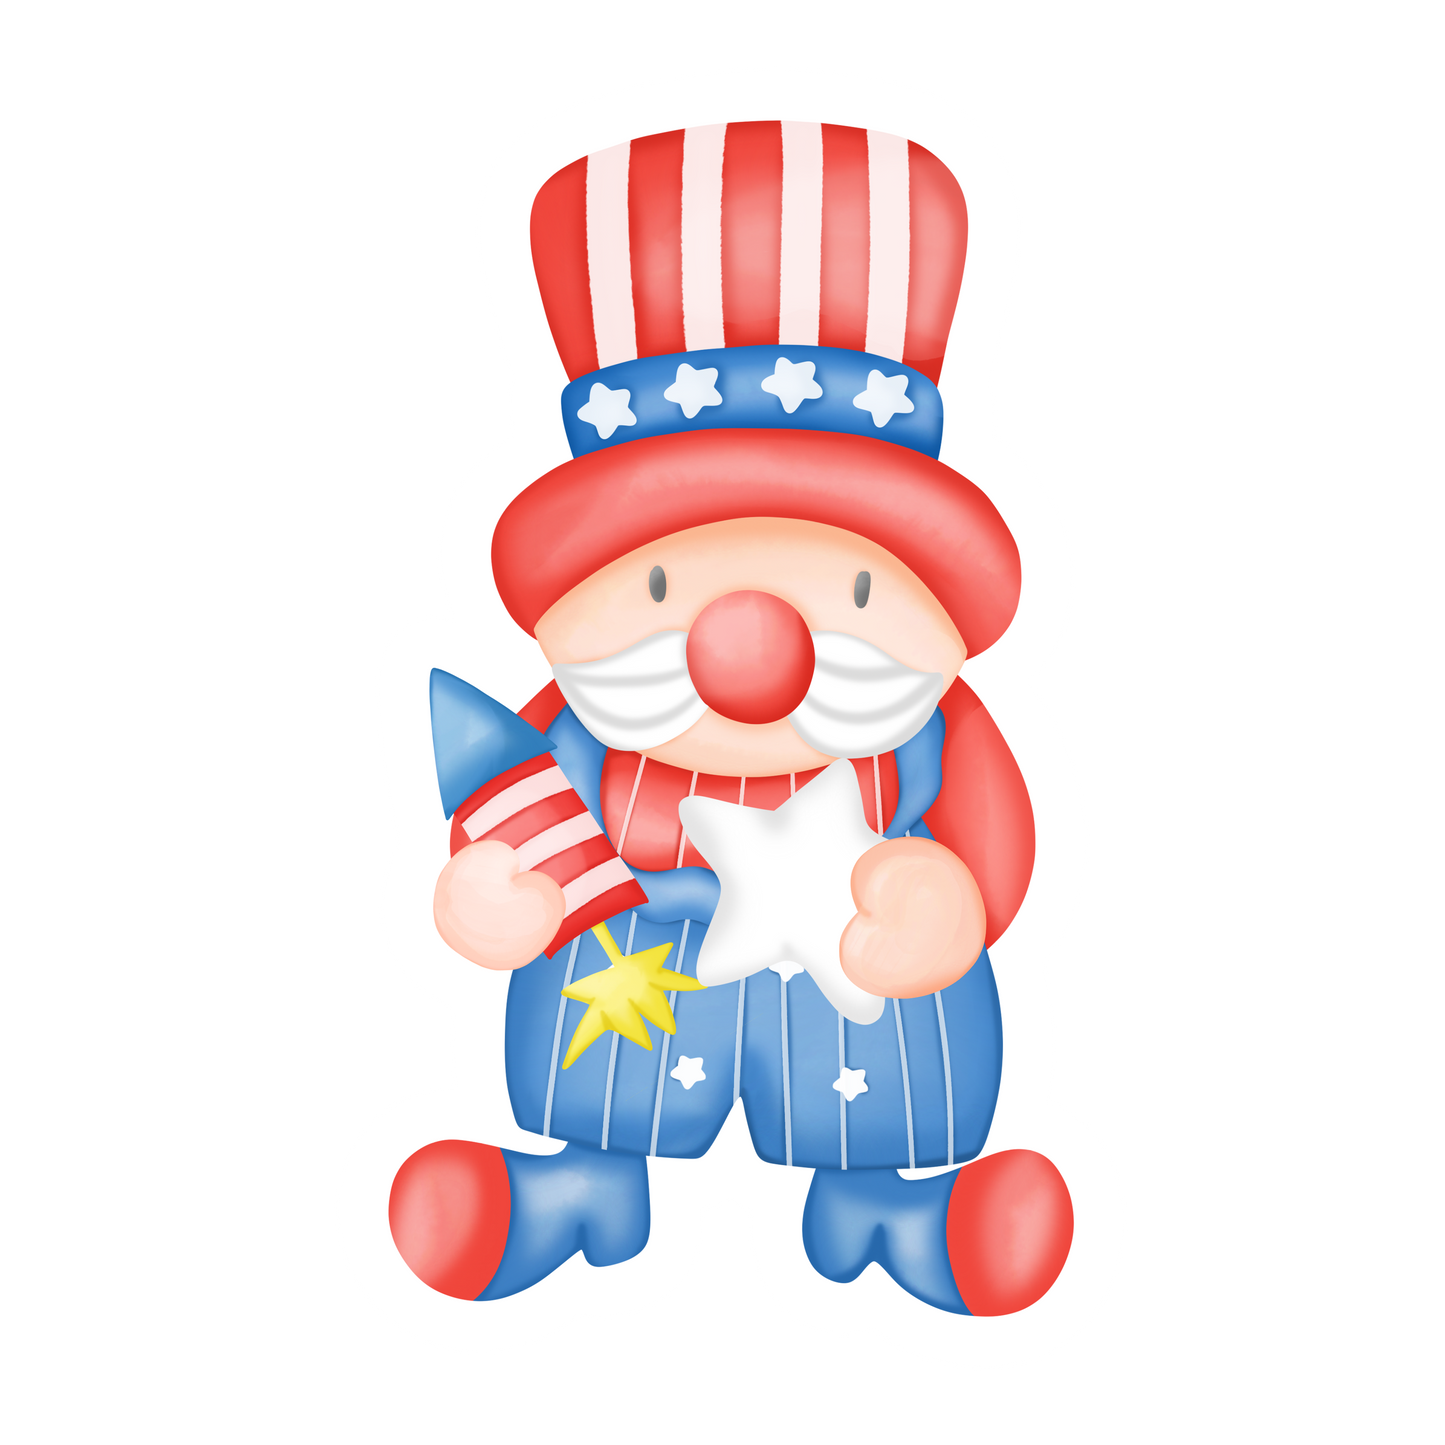 Inspirational Quote "4th of July Gnome with Star" Motivational Sticker Vinyl Decal Motivation Stickers- 5" Vinyl Sticker Waterproof